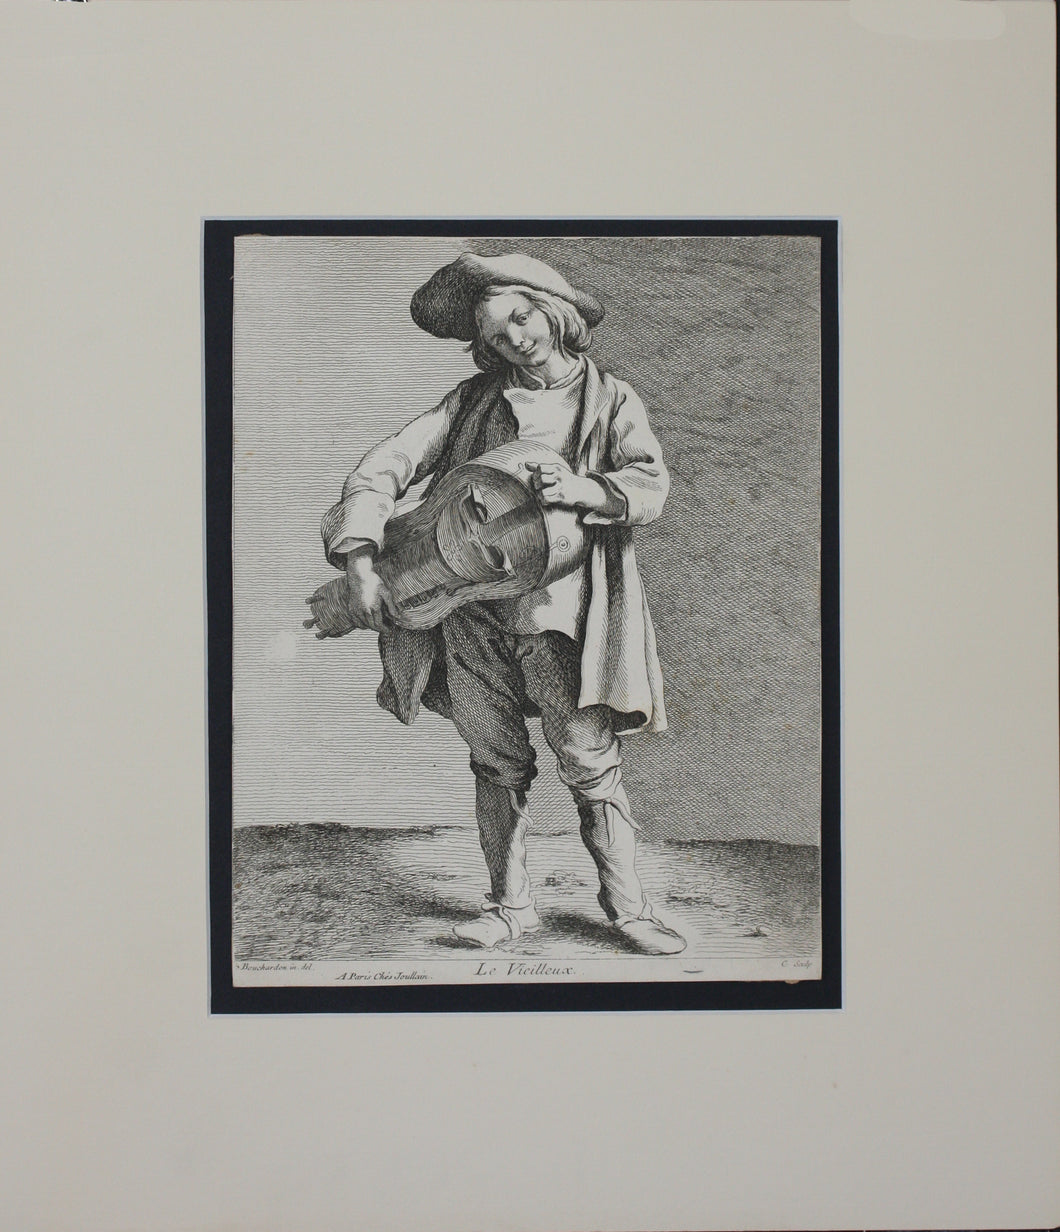 Edme Bouchardon, after.  The Hurdy-gurdy Player.  Etching by Anne Claude de Caylus. 1742.